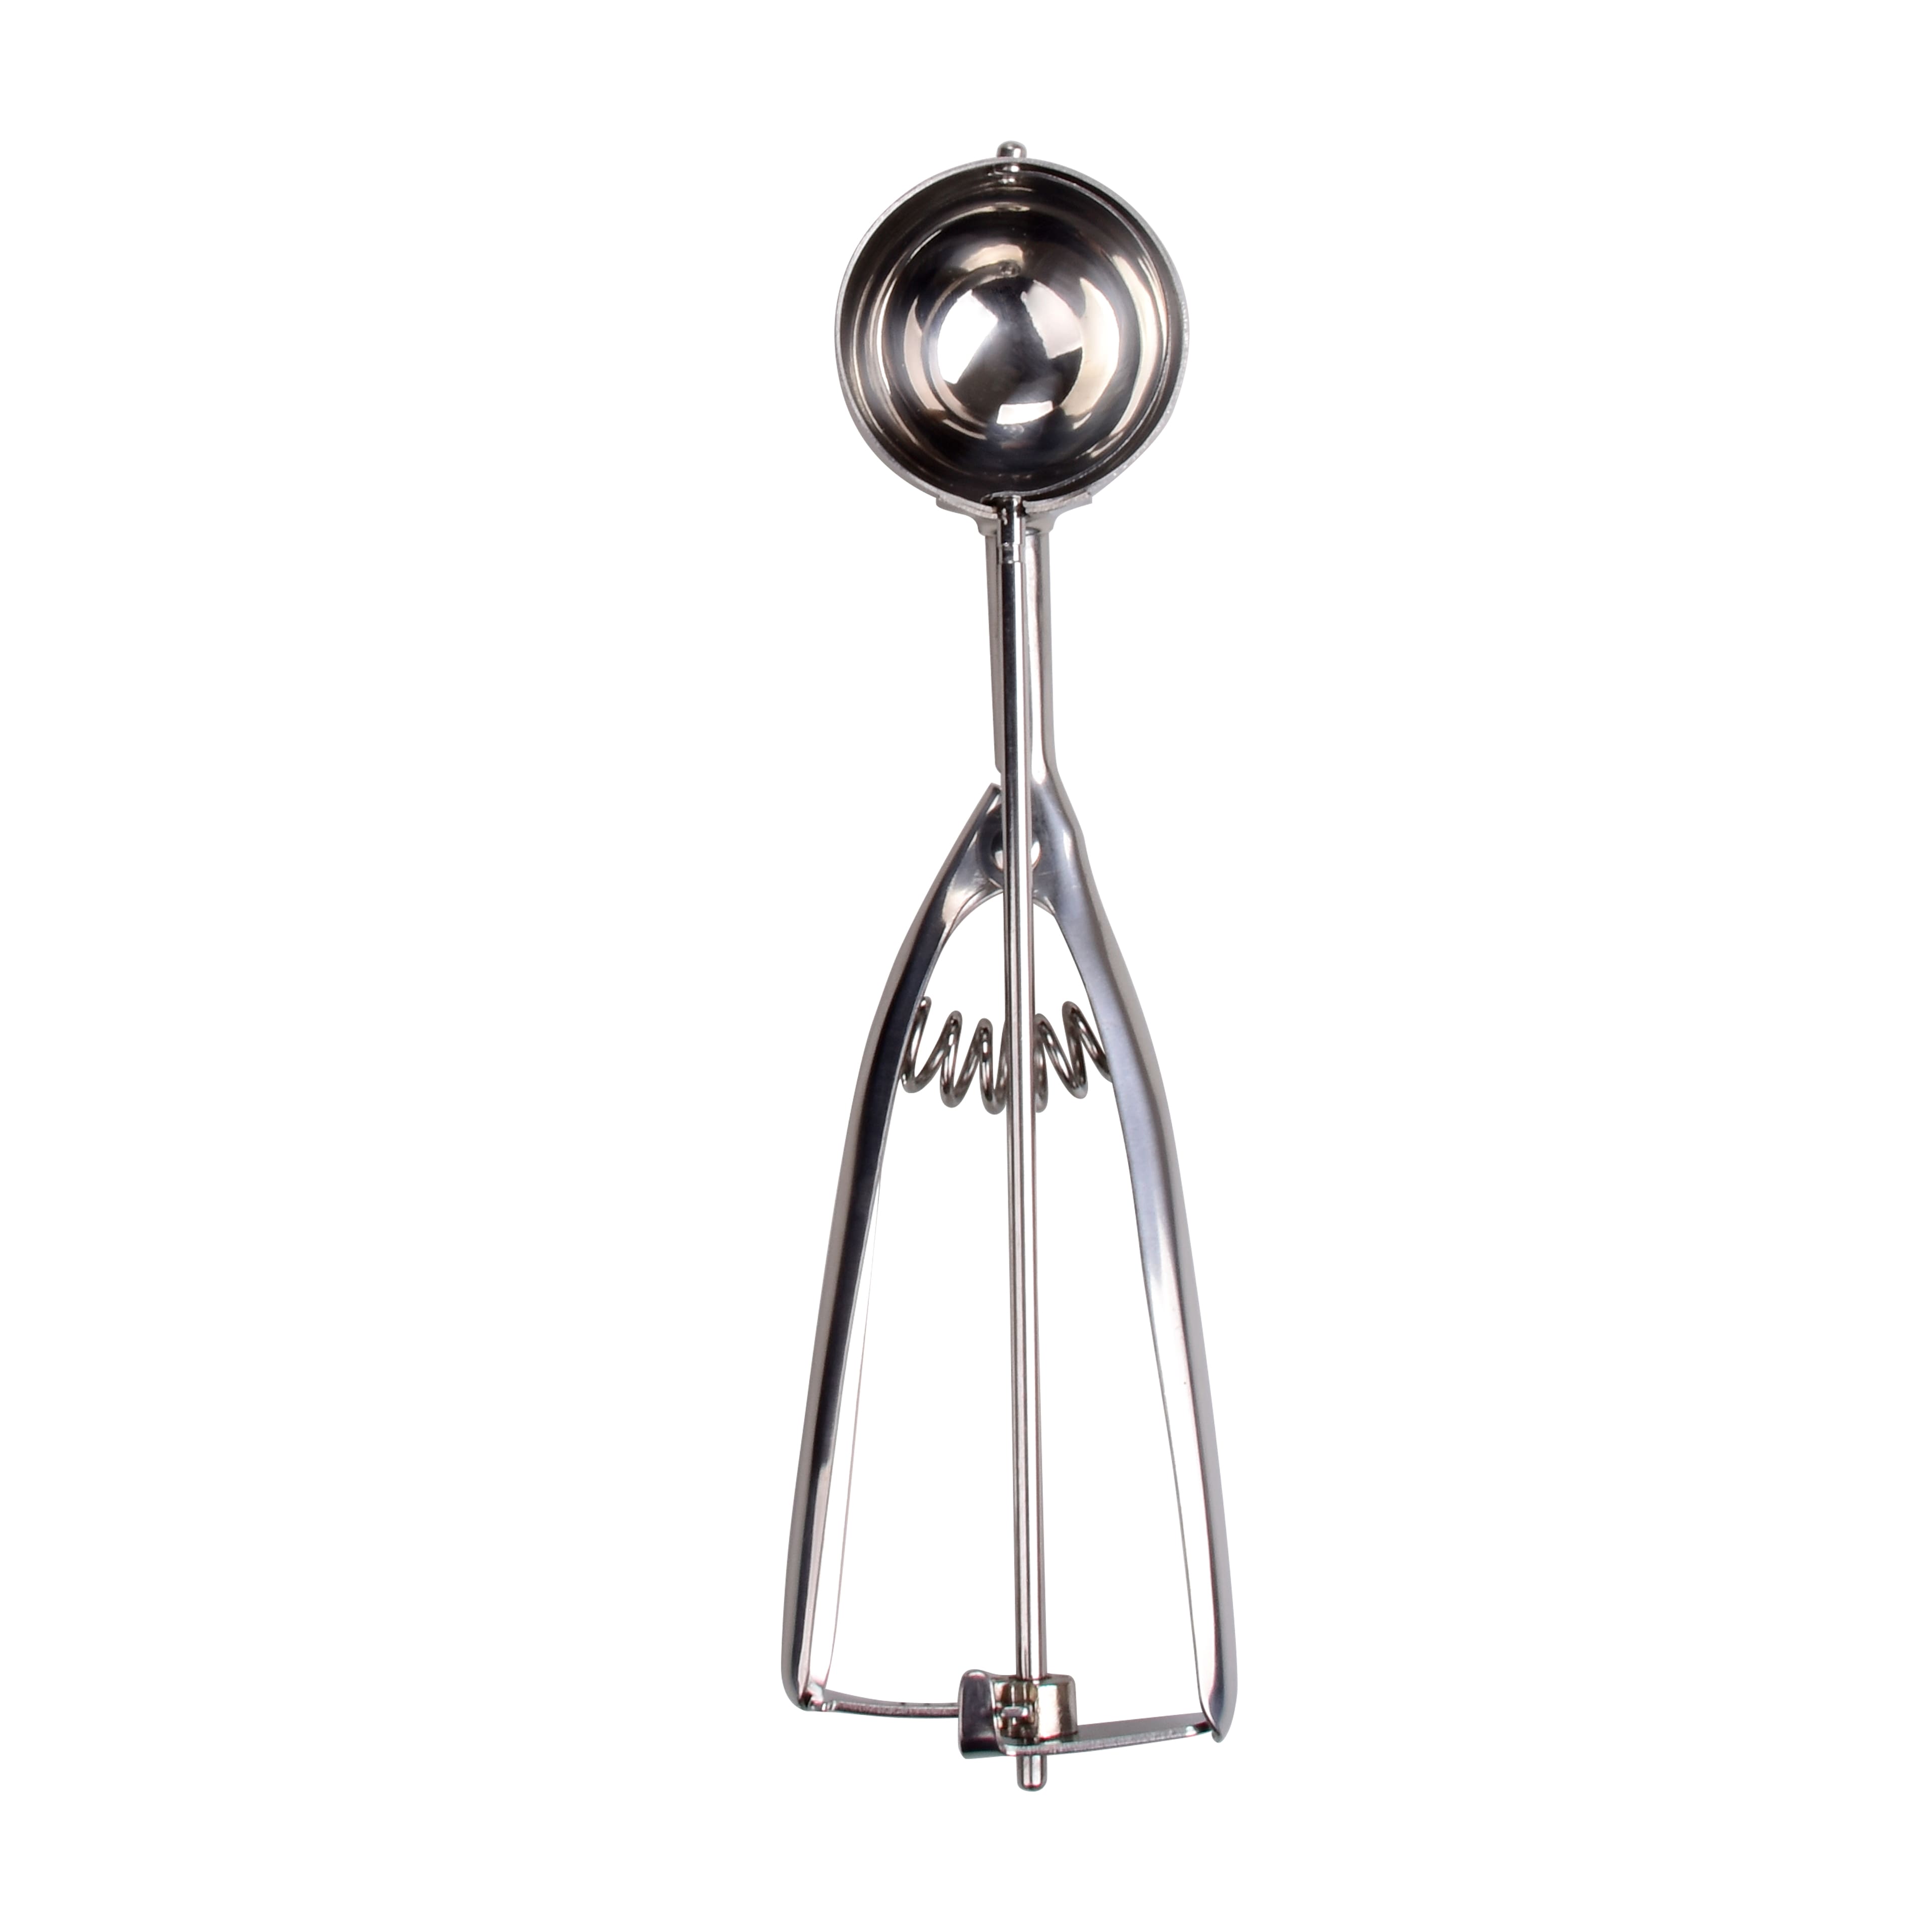 2 Stainless Steel Cookie Scoop by Celebrate It®